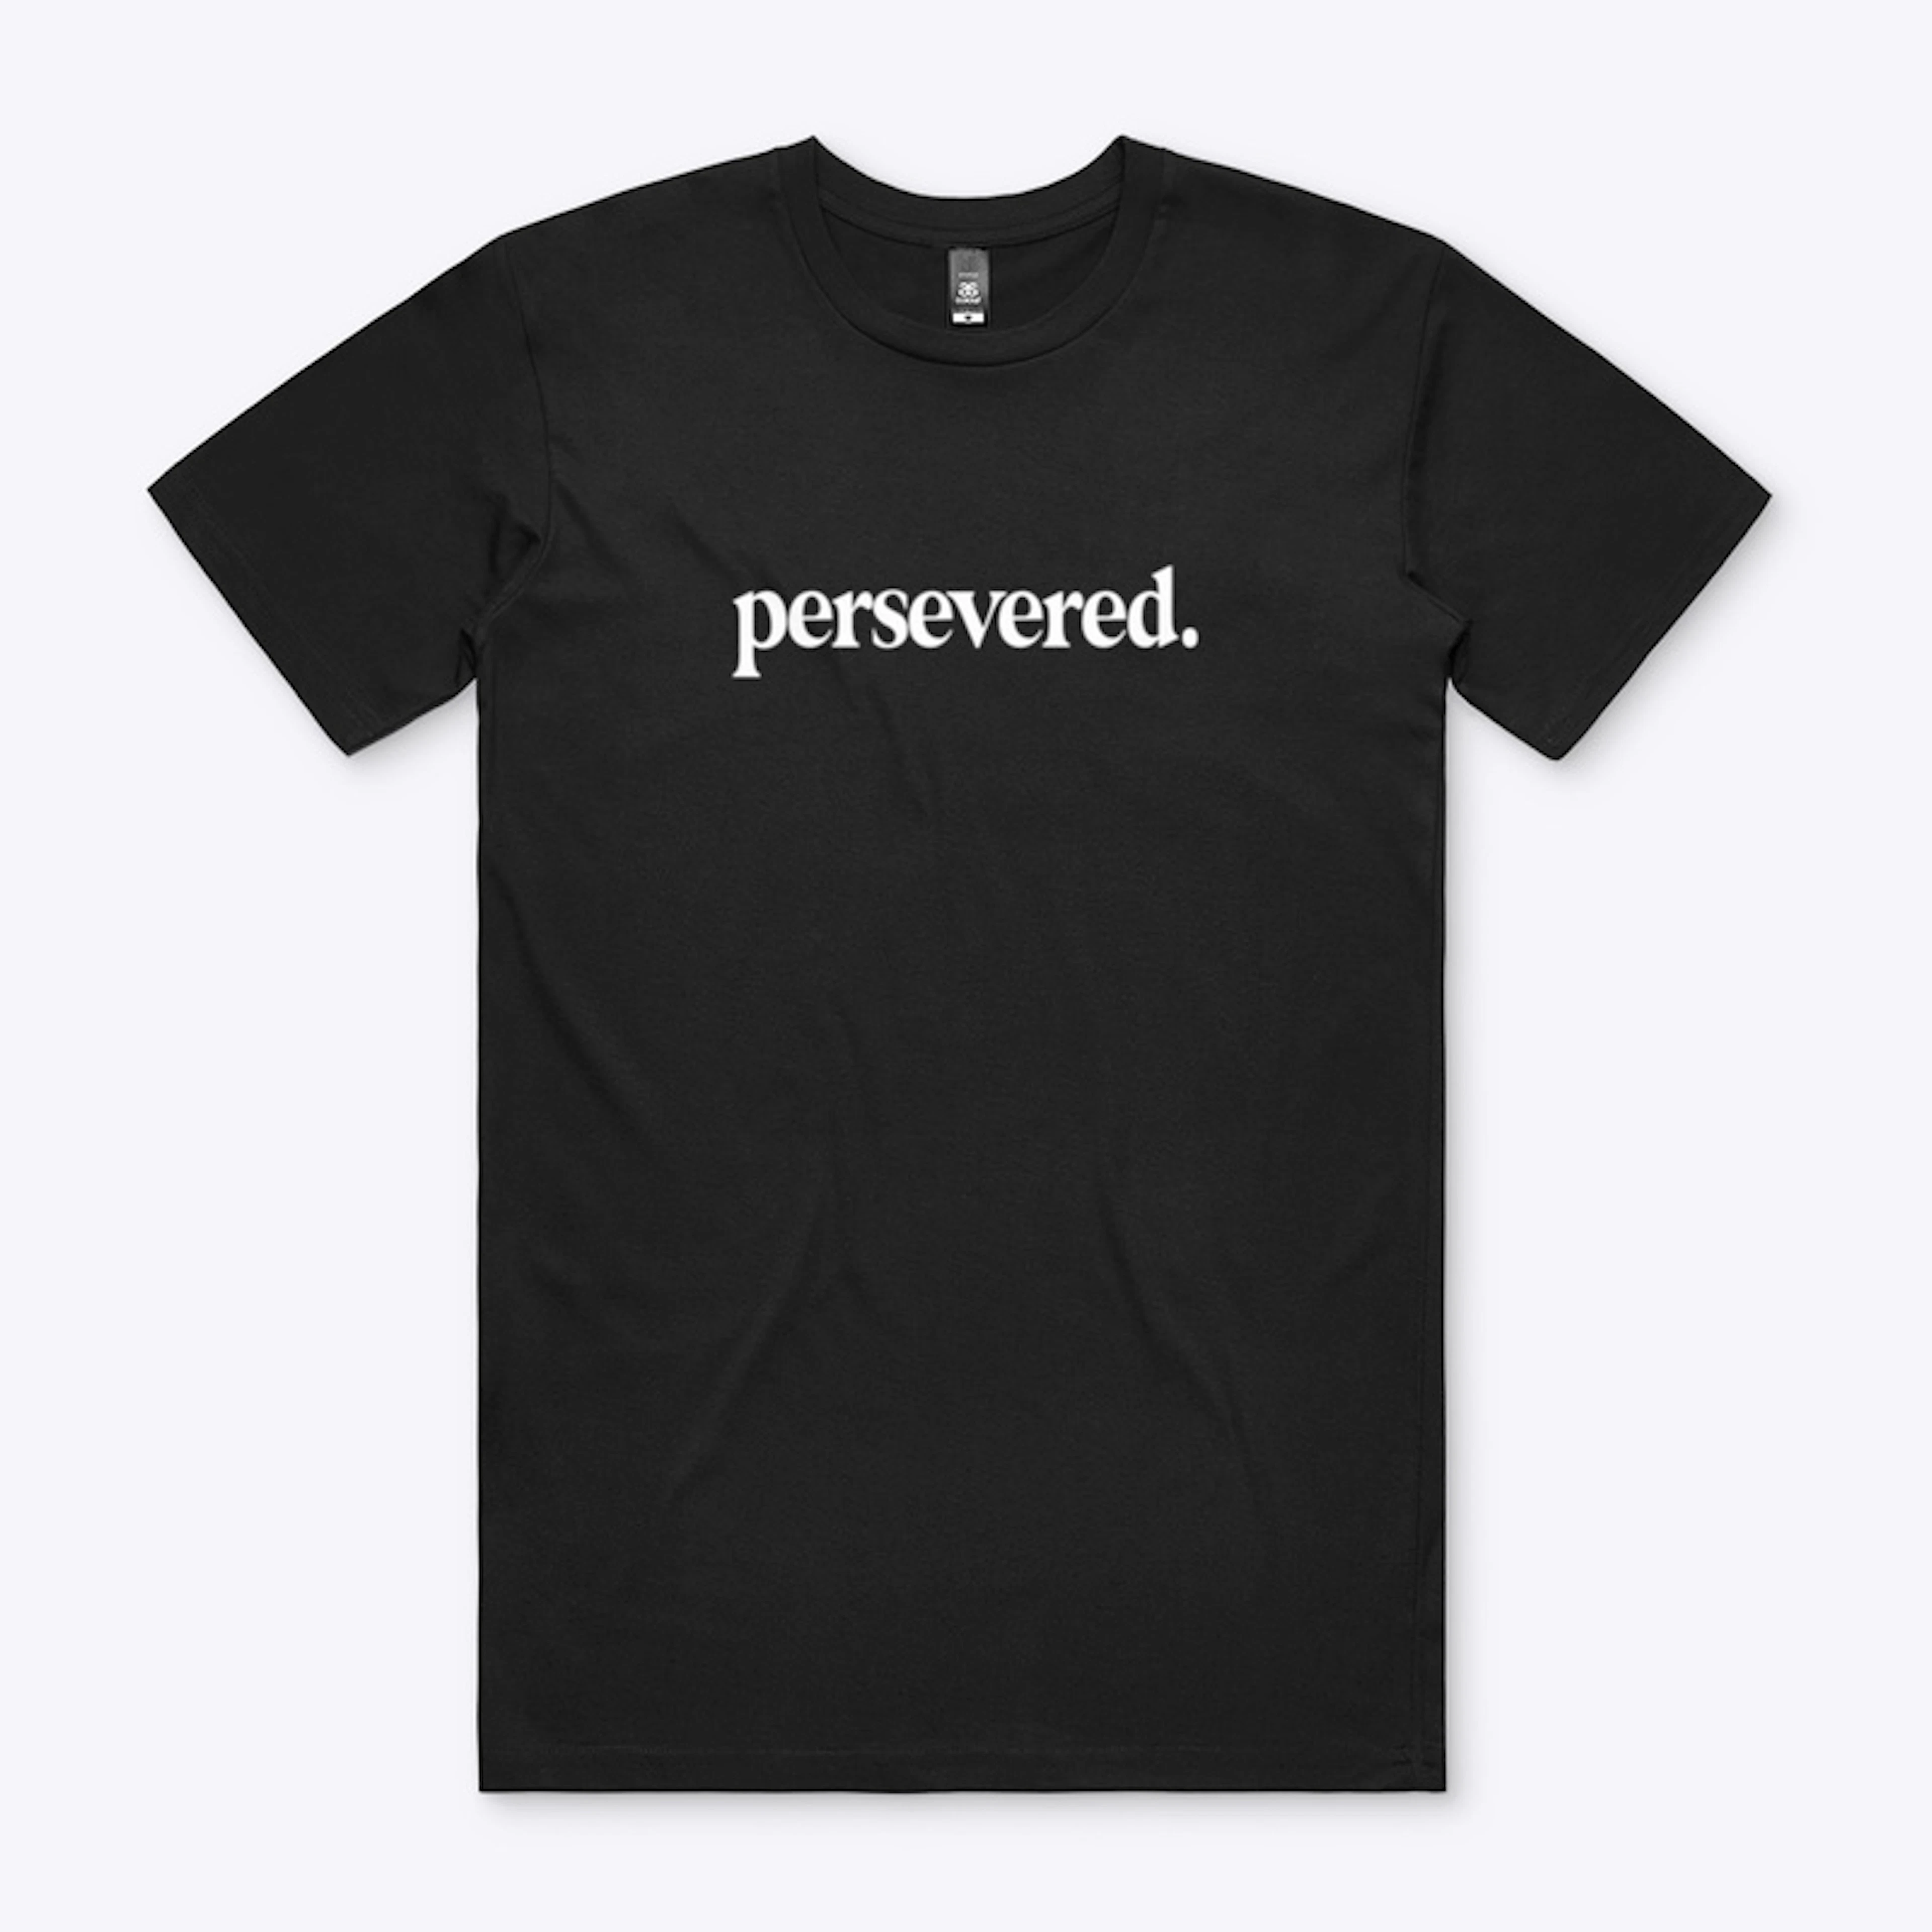 persevered